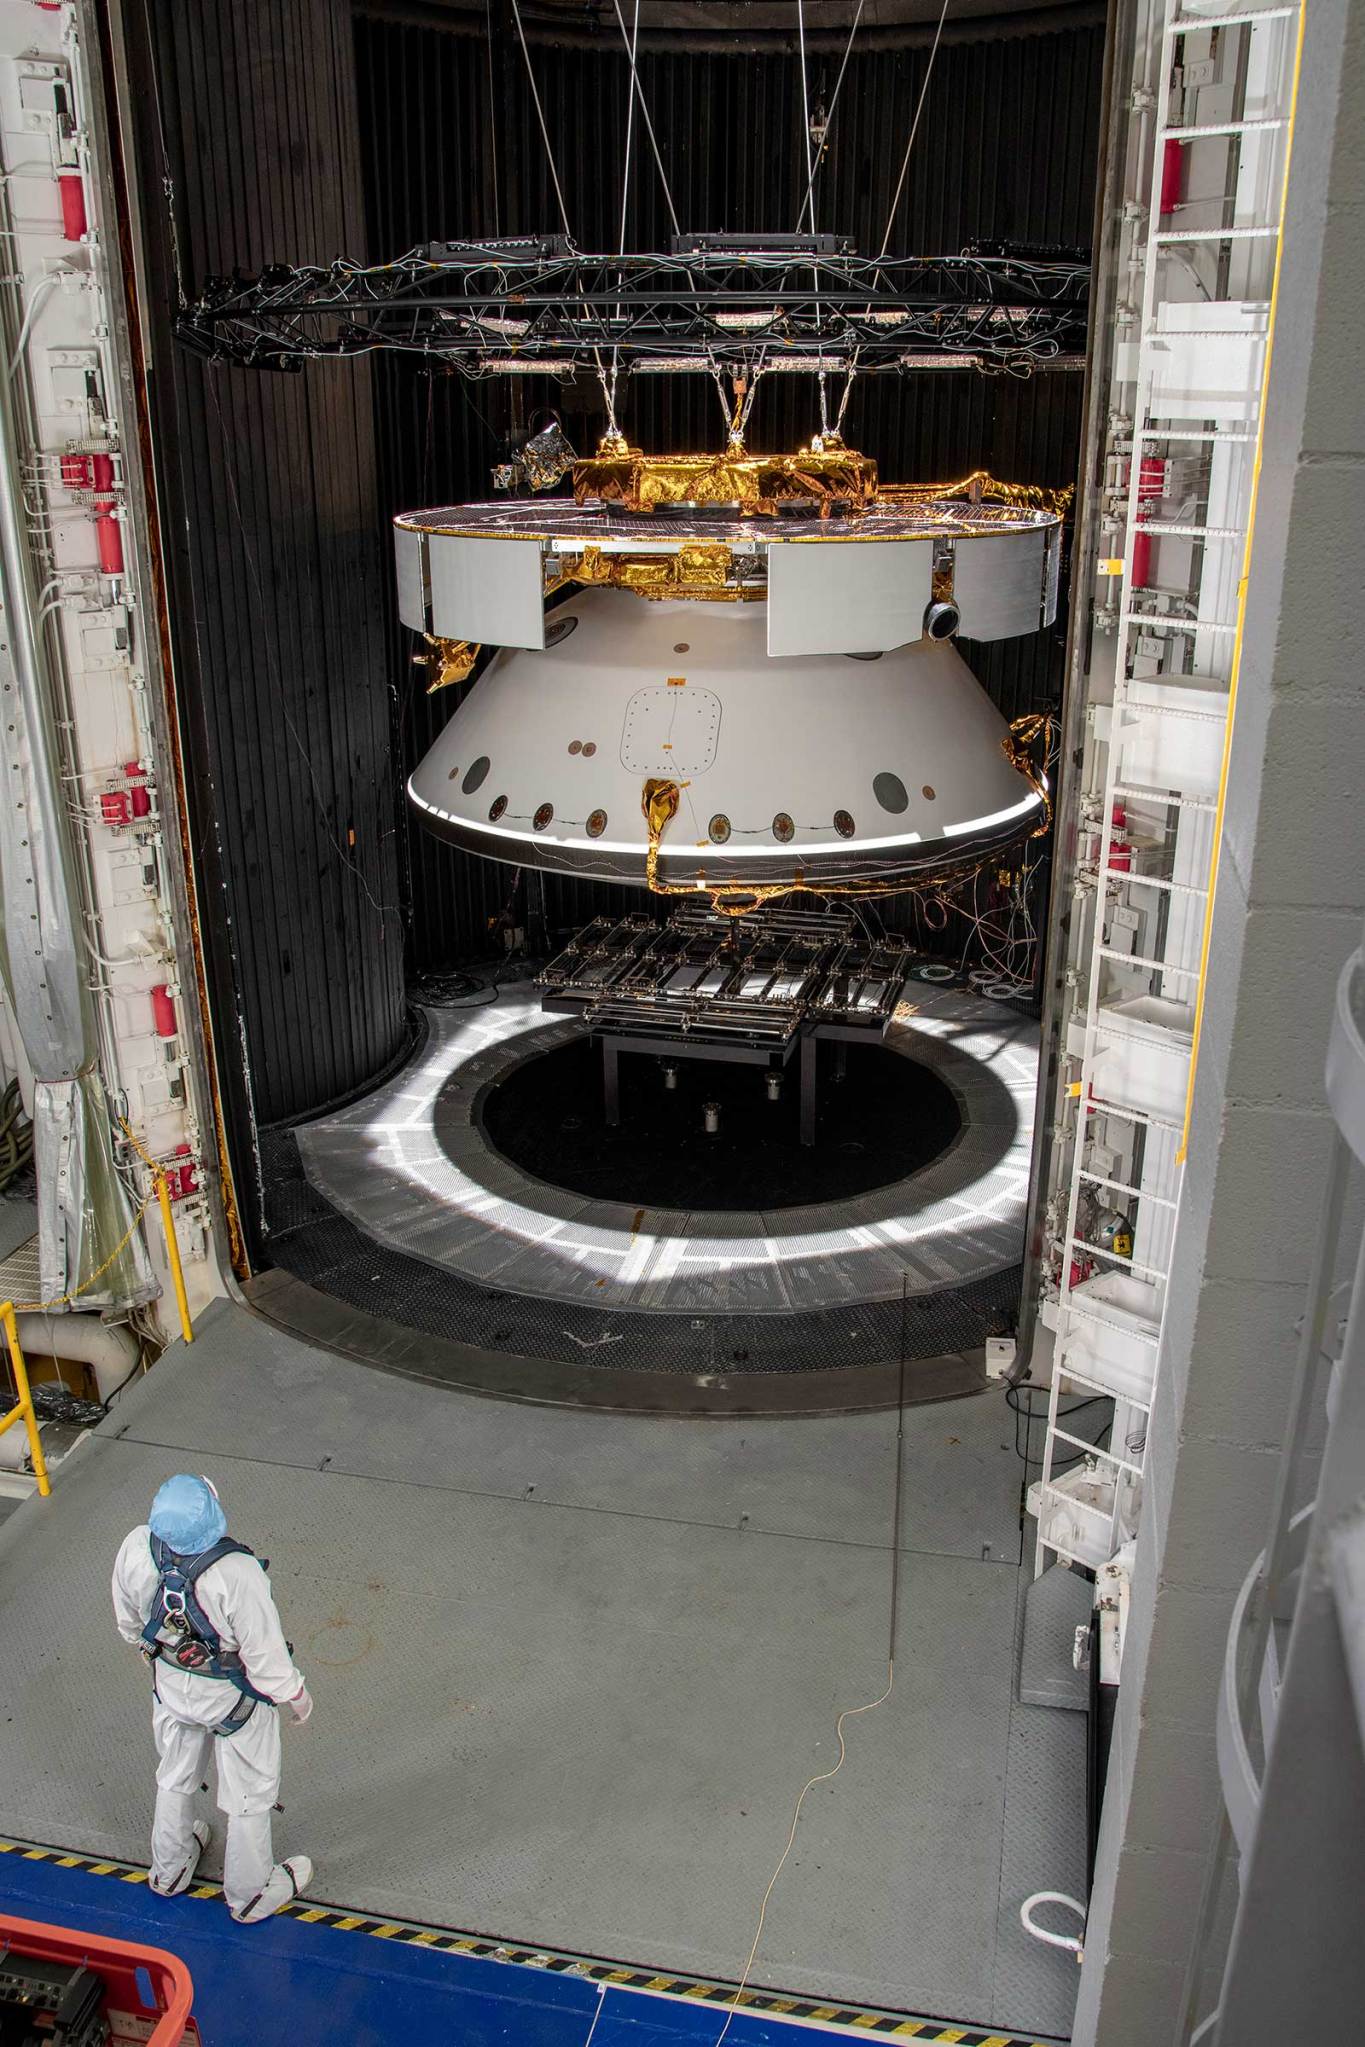 A man looks into the 25-foot Space Simulator where the Mars 2020 spacecraft is being tested.